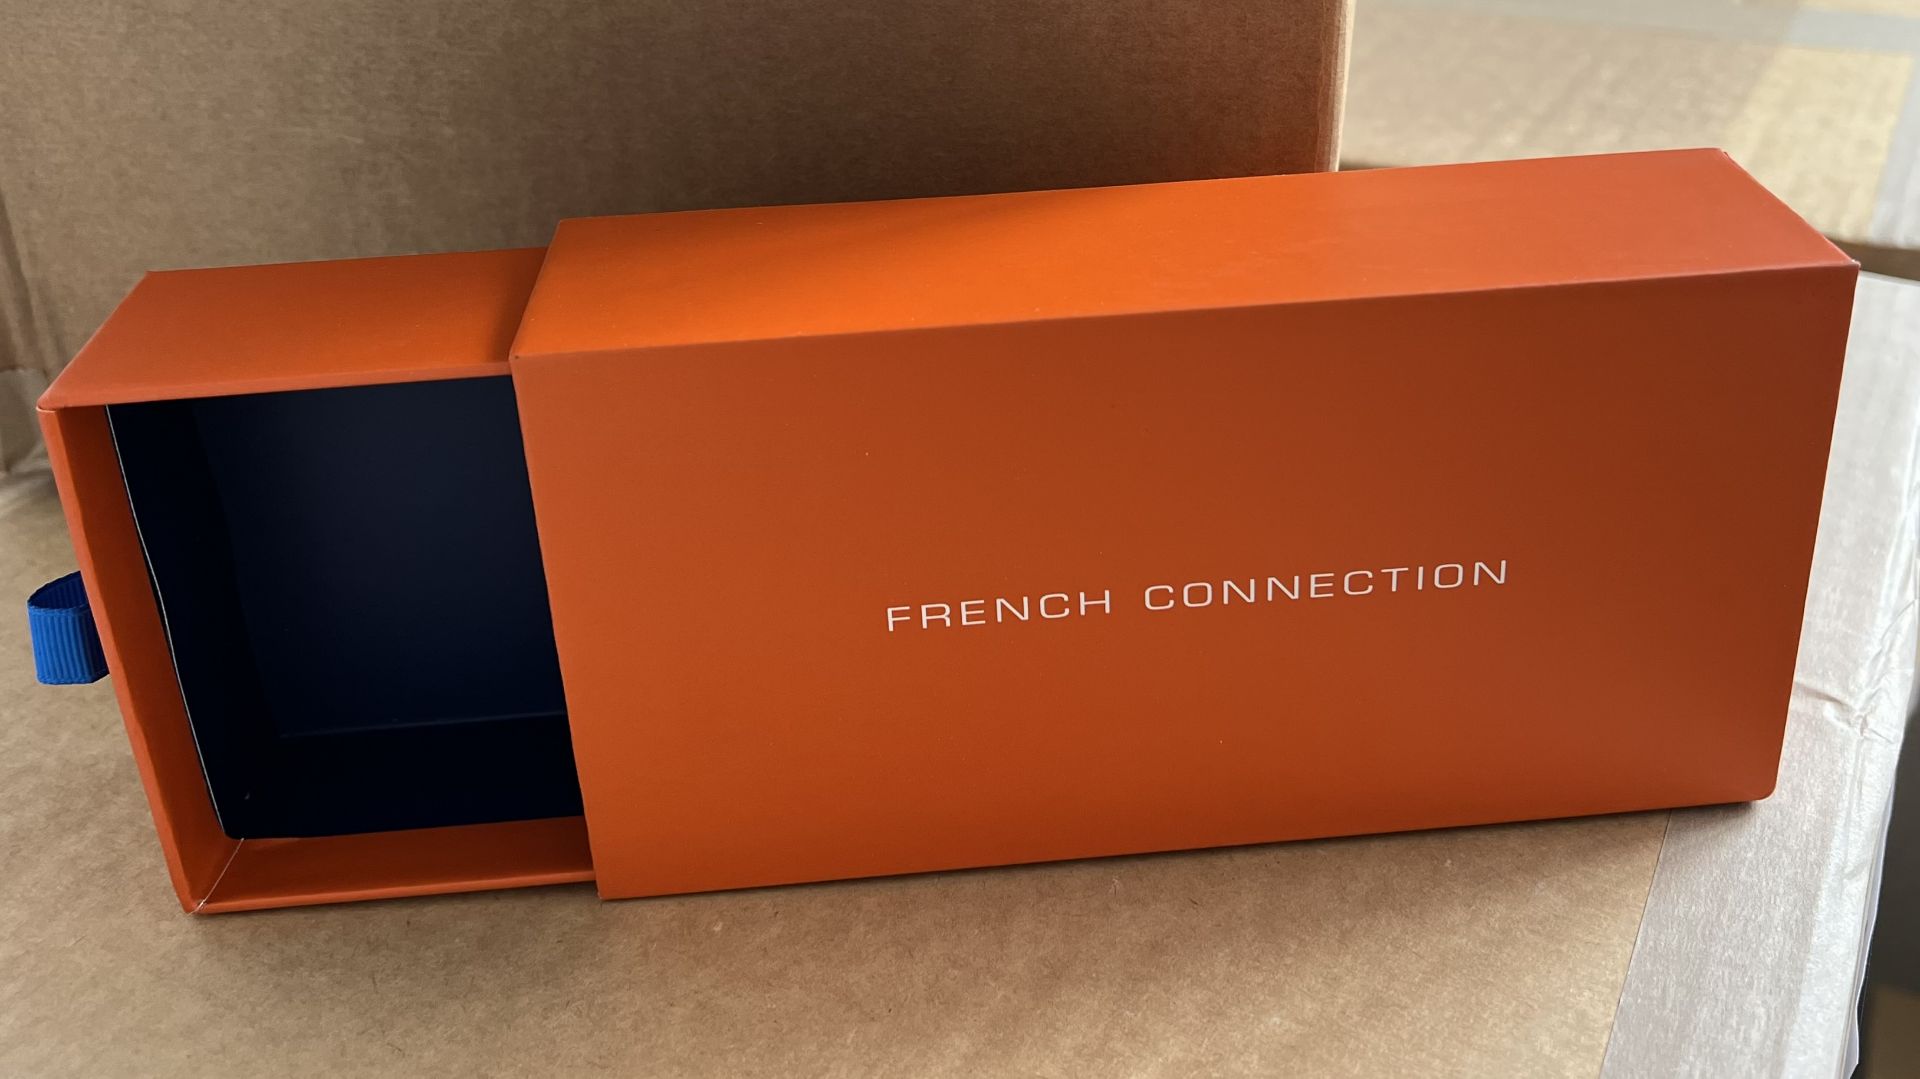 88 x French Connection Glasses / Sunglasses Orange Boxes - (NEW) - SELL FOR £440+ ! - Image 2 of 2